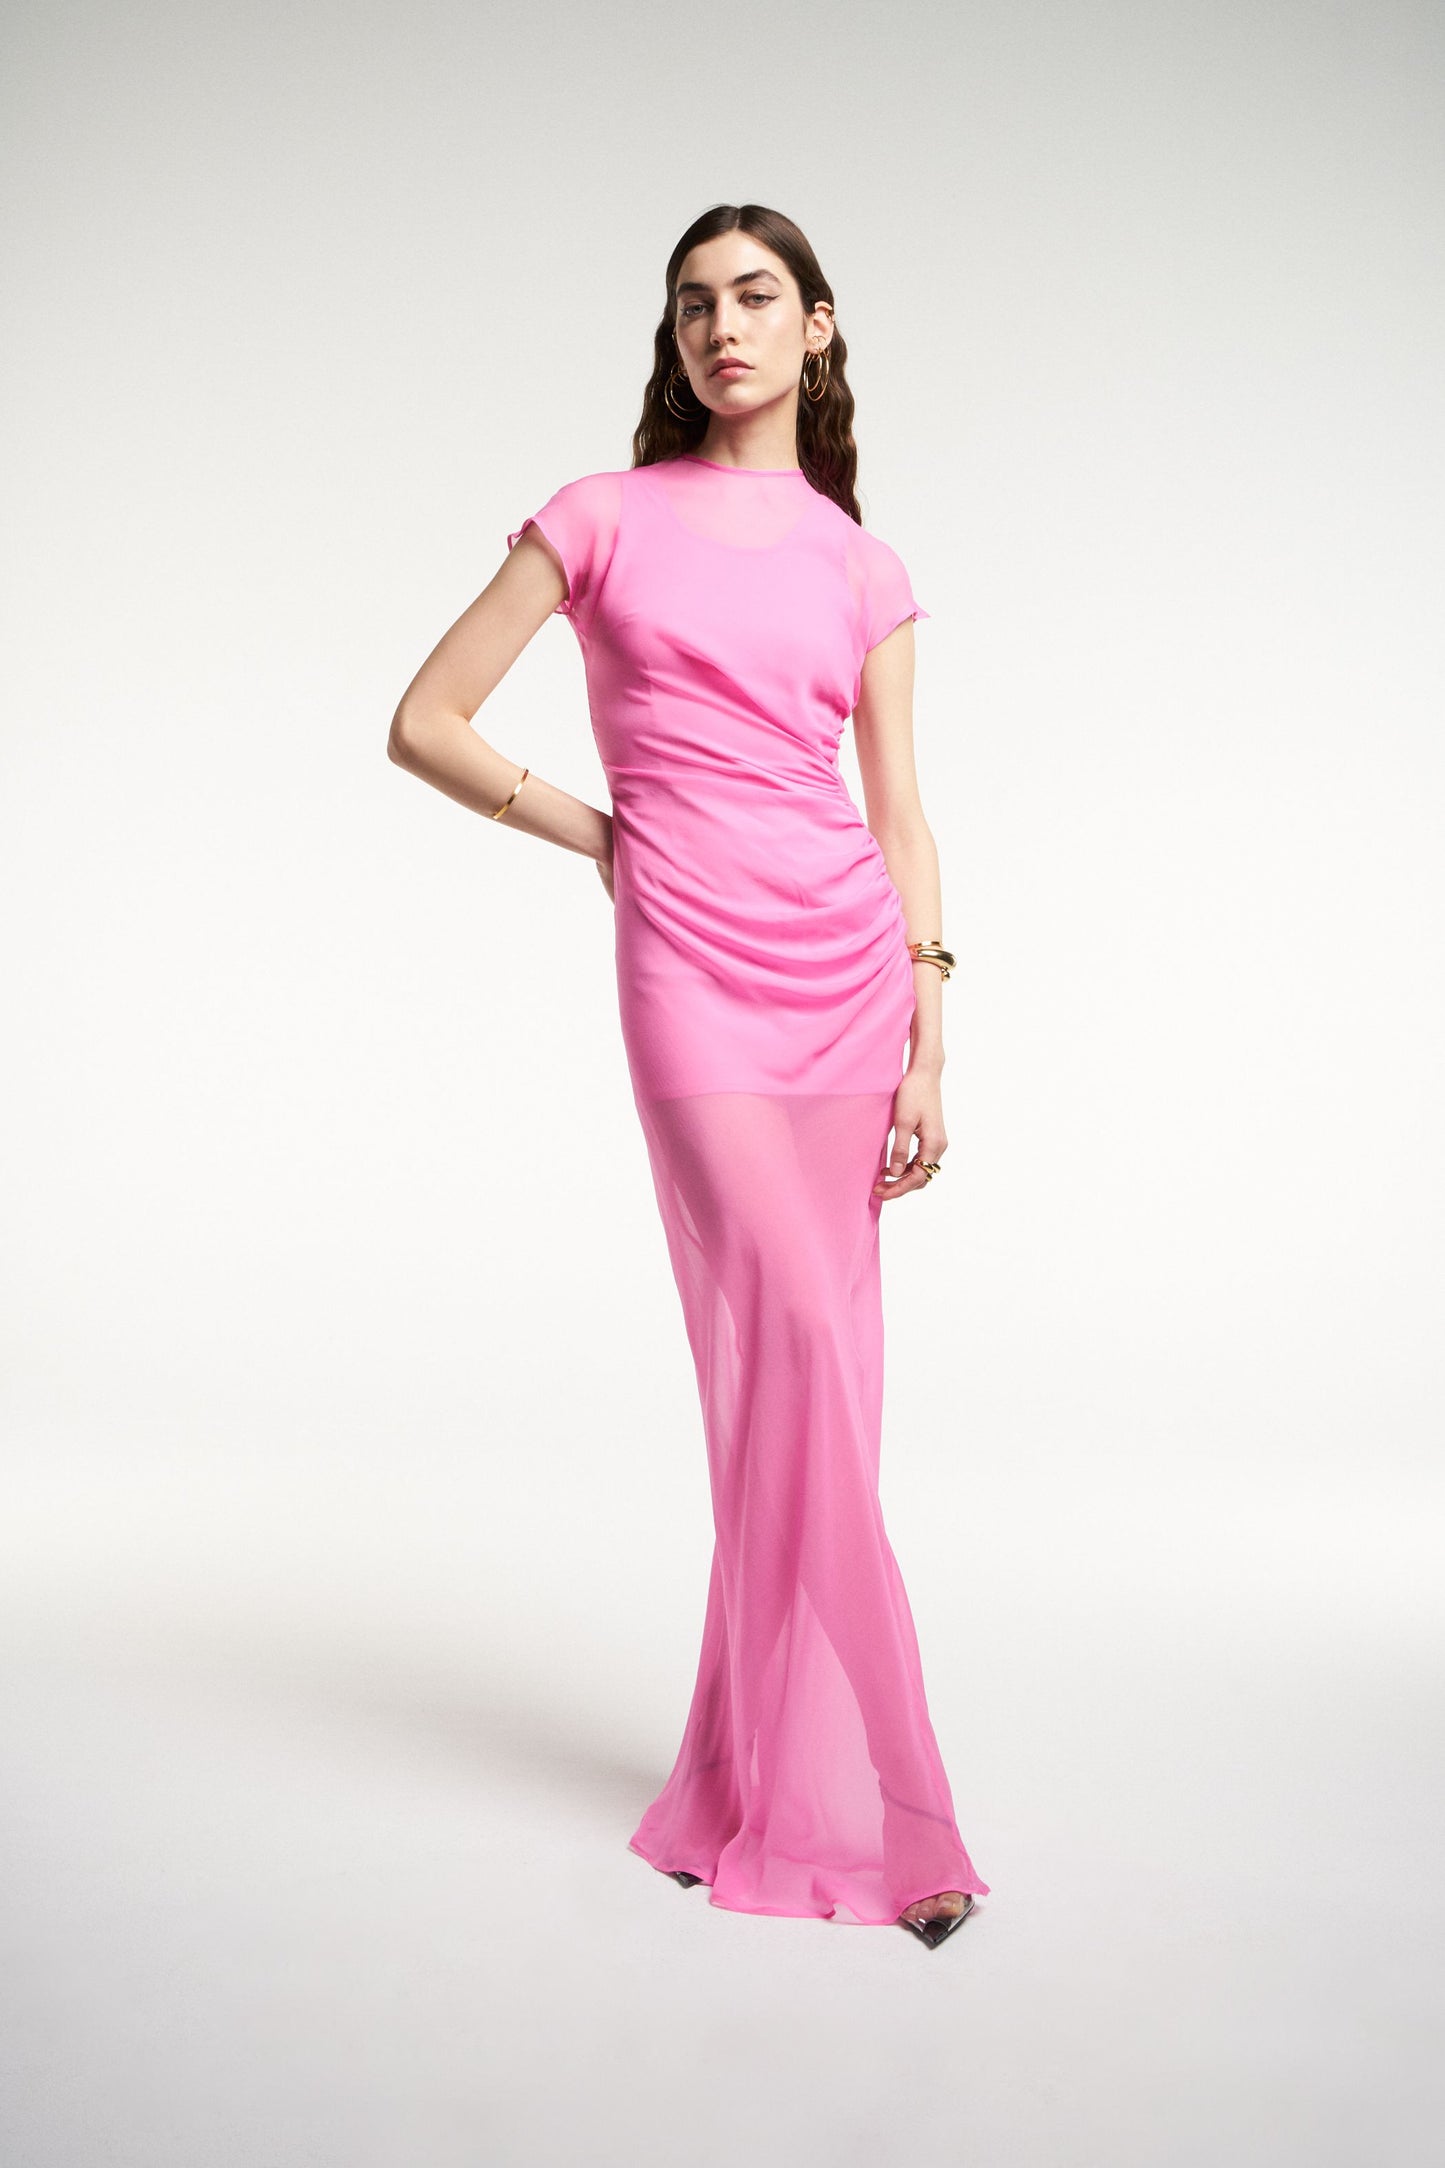 DOUBLE PINK MAXI DRESS